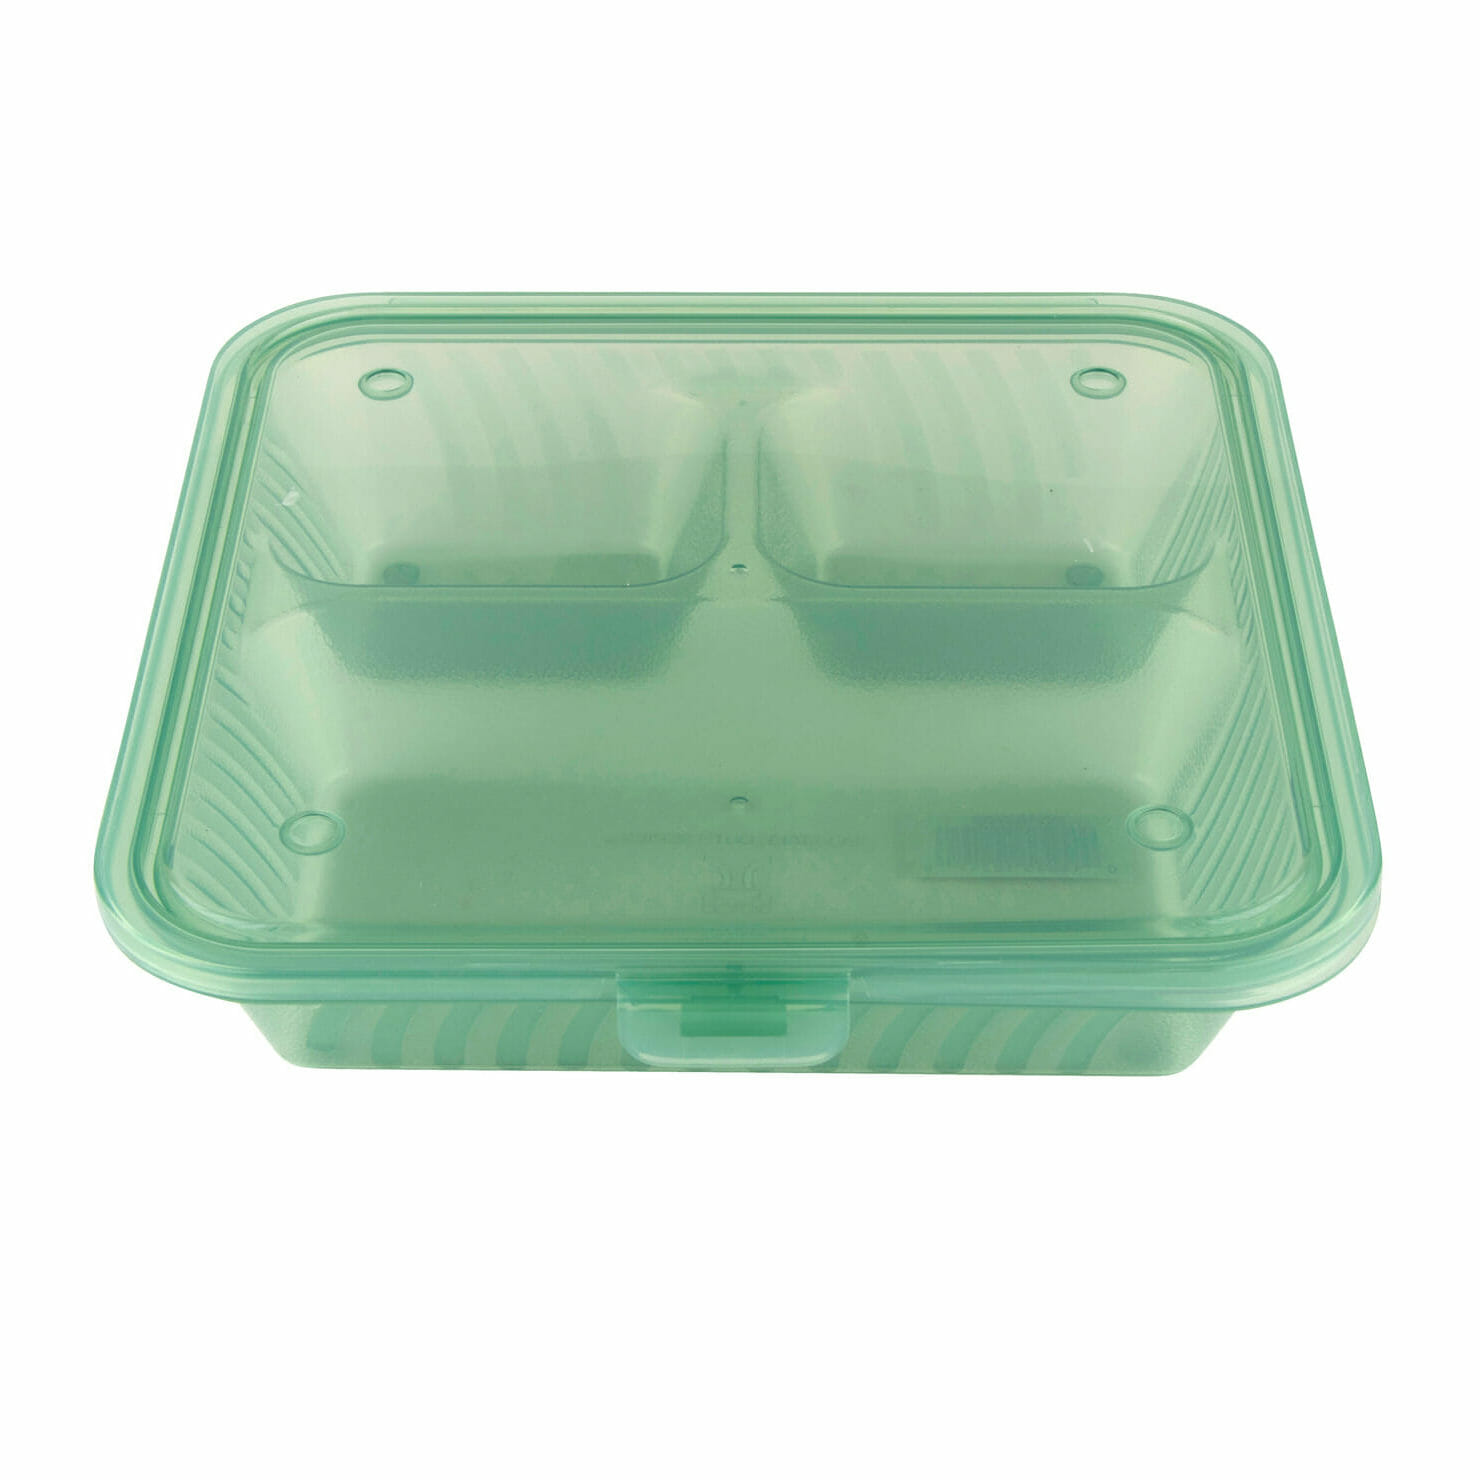 Empress™ Earth 9 Carryout Food Containers - Case of 150